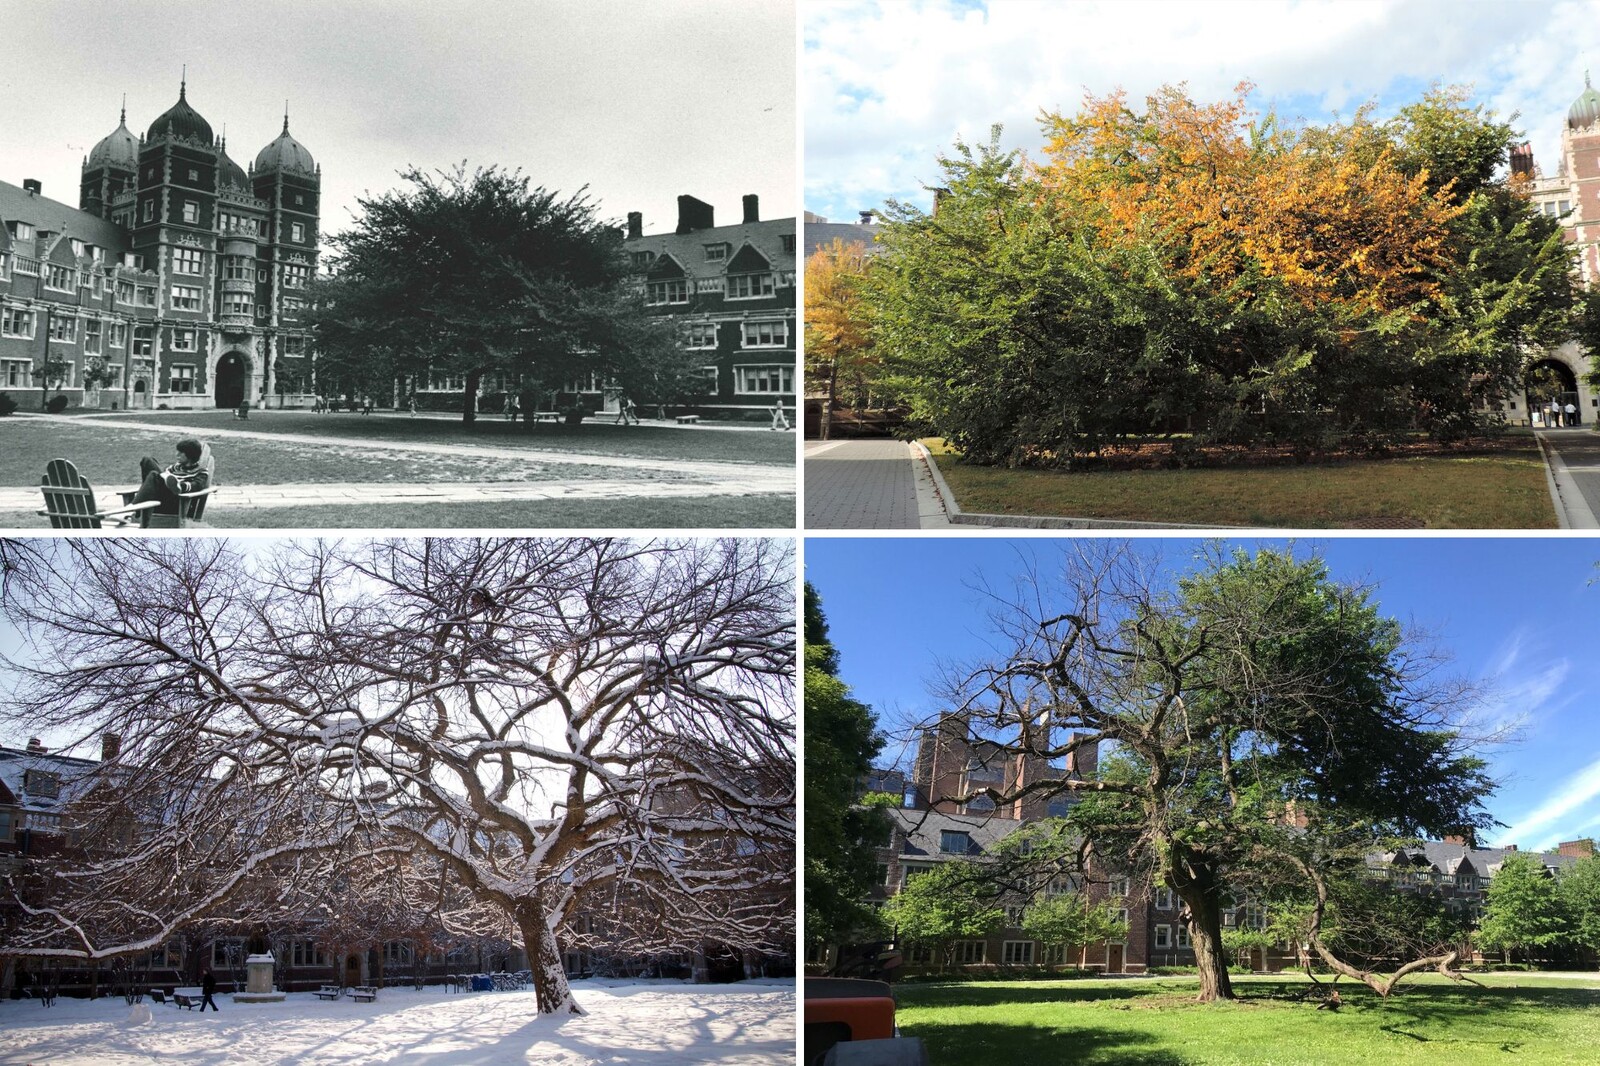 large elm in penn quad over the years